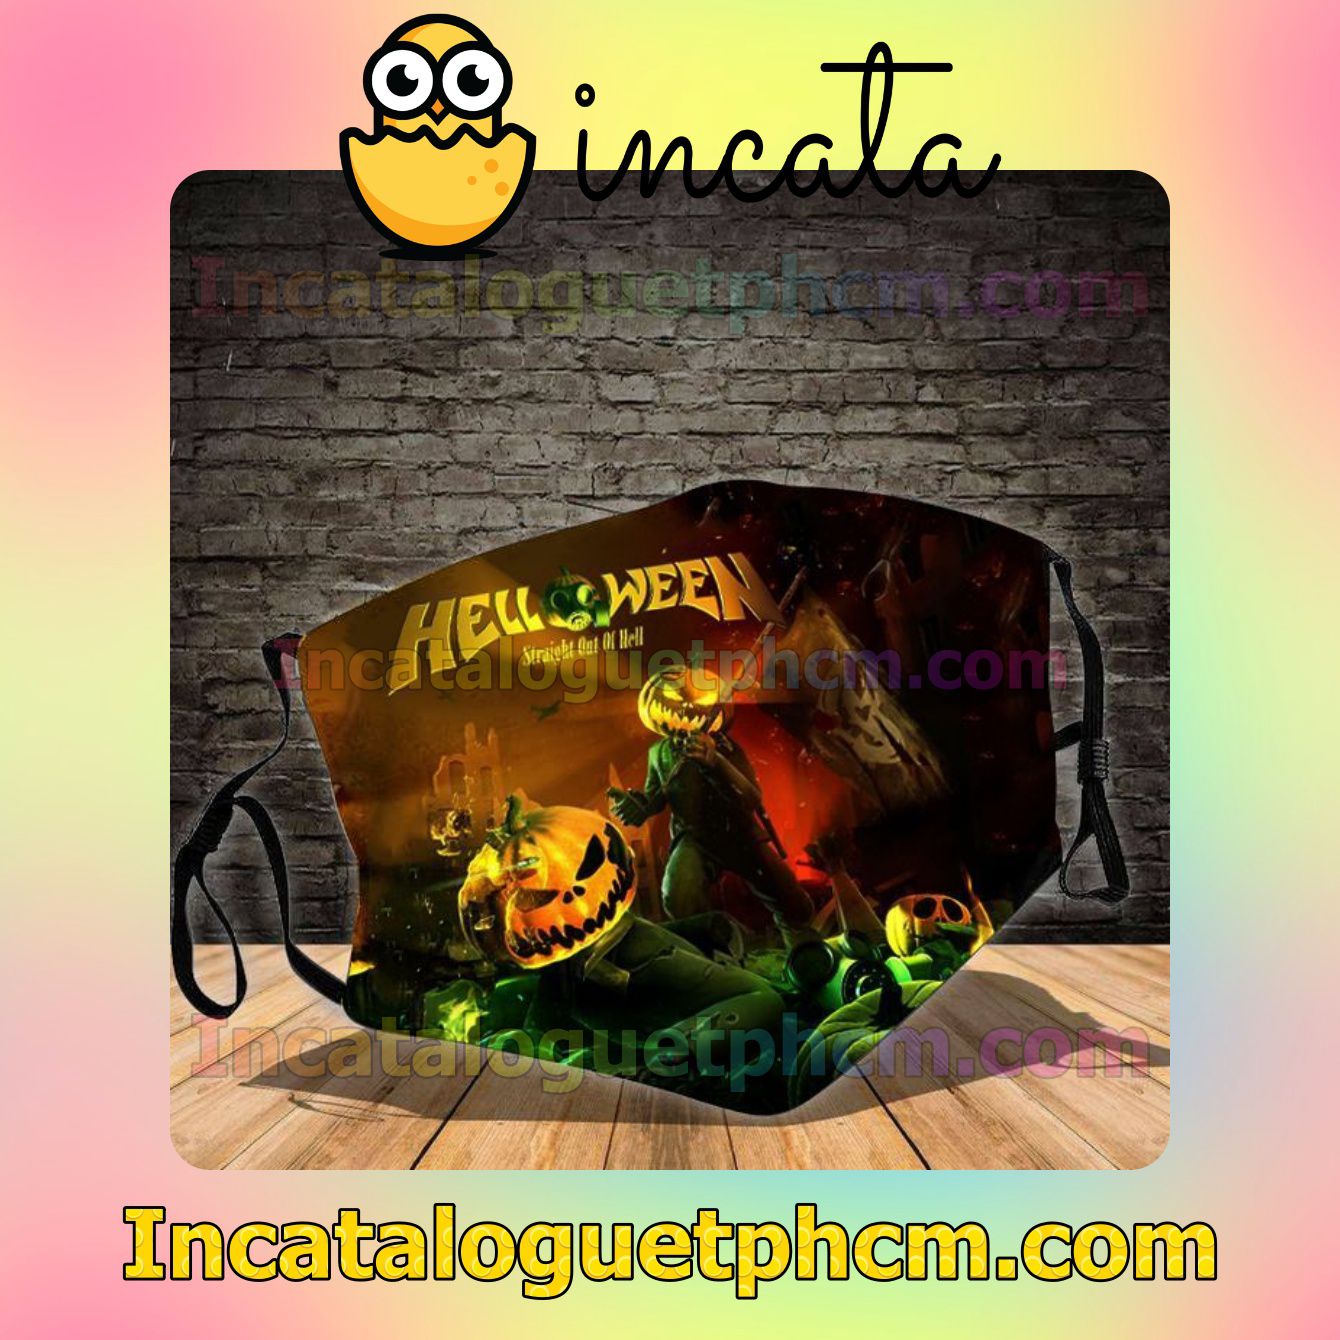 Helloween Straight Out Of Hell Album Cover Cotton Masks